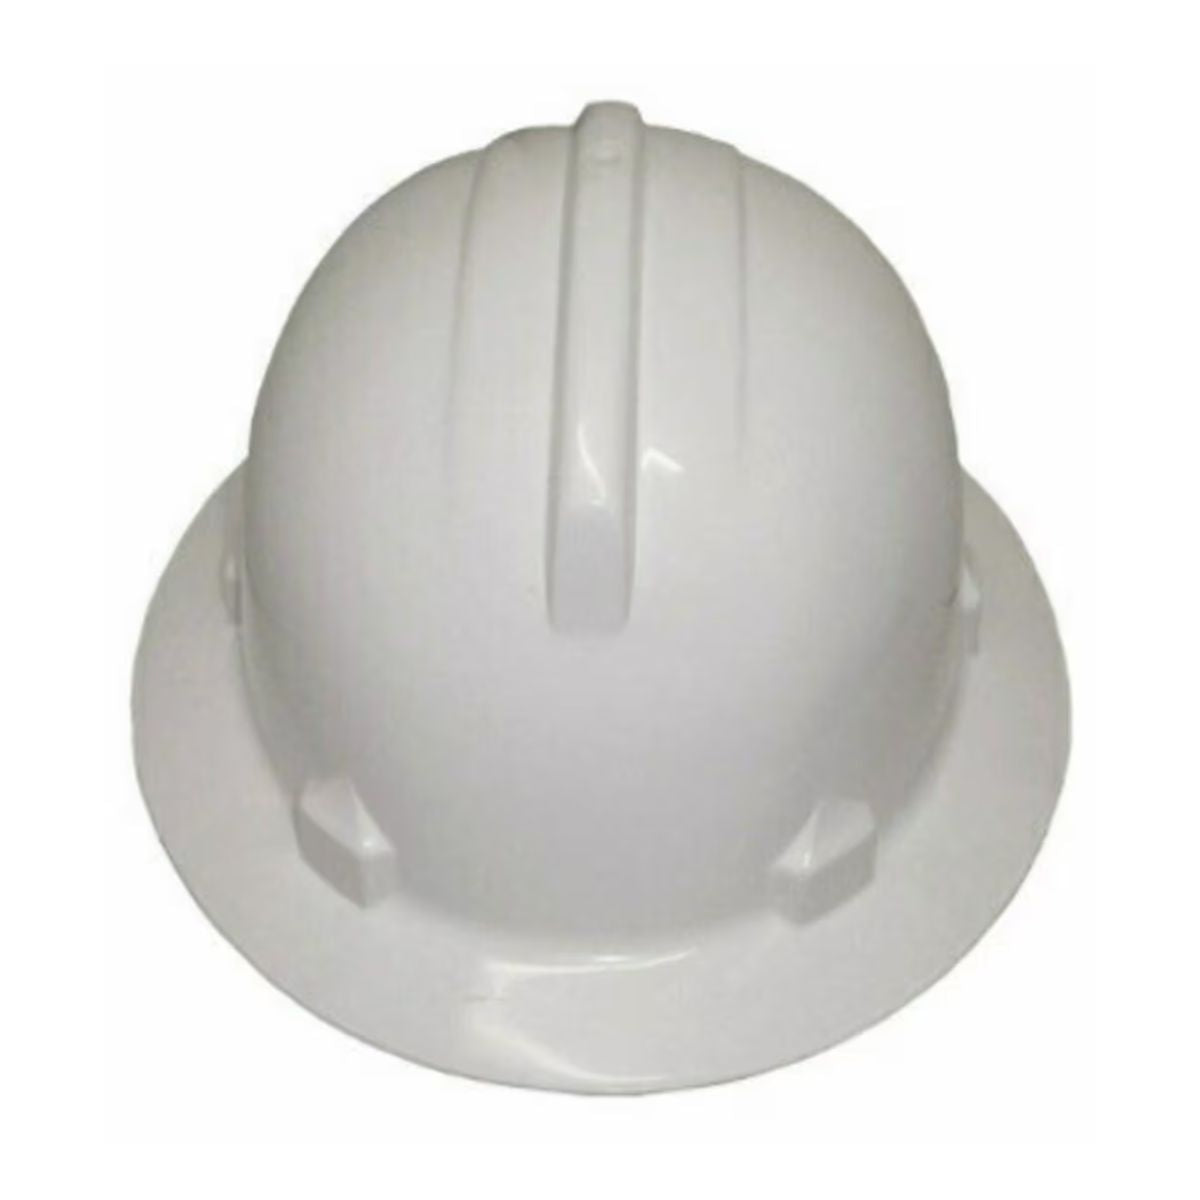 Hard Hats: Reliable Head Protection